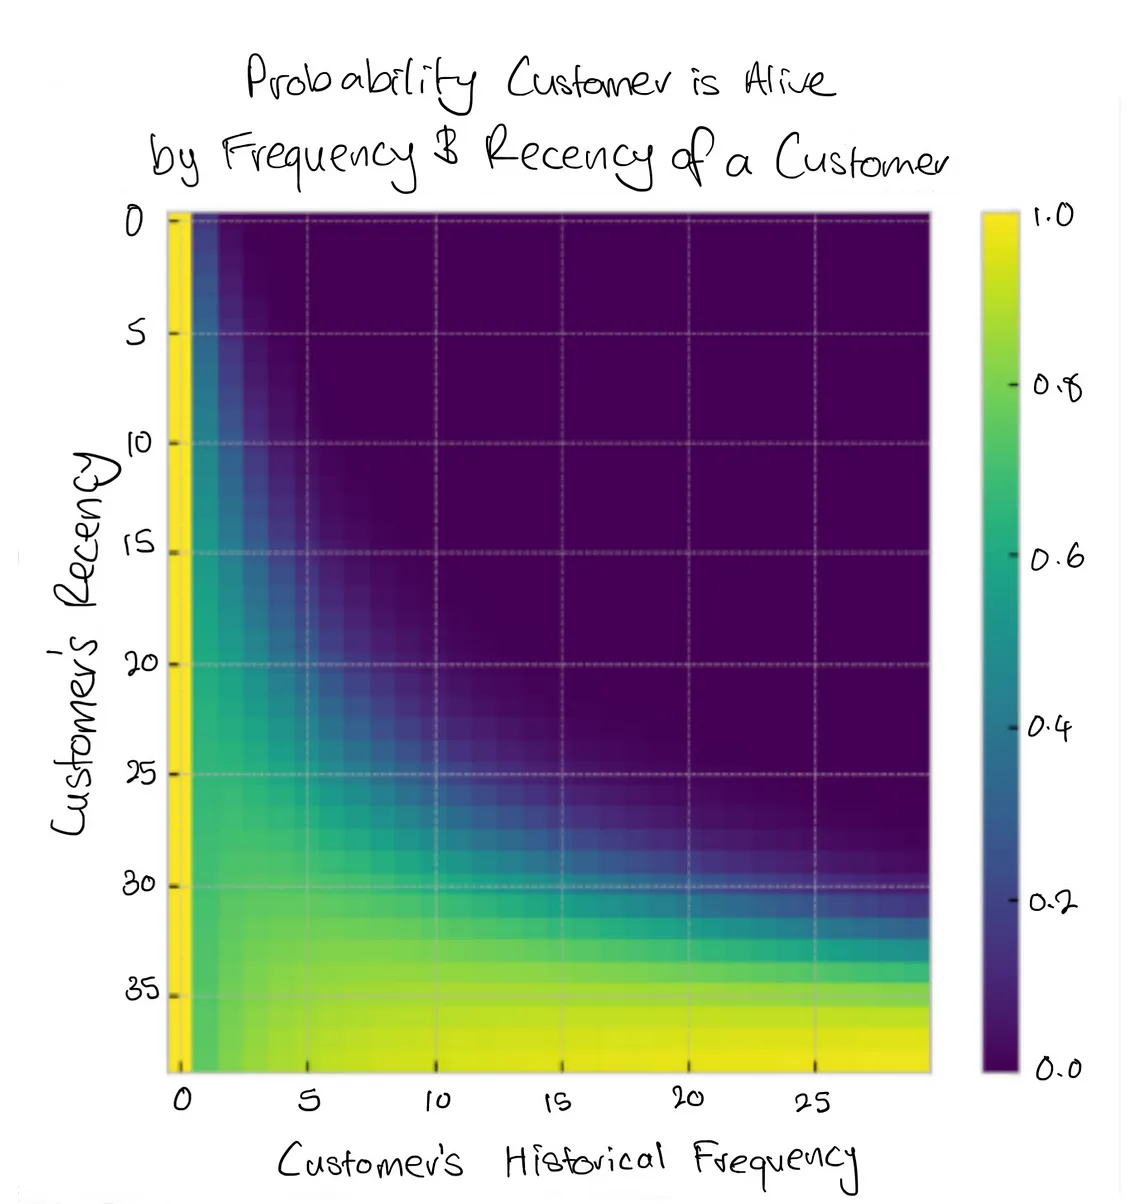 A graph with Customer’s recency on the y axis (values from 35 to 0 as you travel up the axis), and Customer’s Frequency on the x axis (values from 0 to 25). The entire graph is filled with a colour gradient reflecting the probability that a customer is alive. Close to both axes, the colours indicate high P-Alive. But most of the graph, spreading from the upper right corner, indicates low P-Alive.